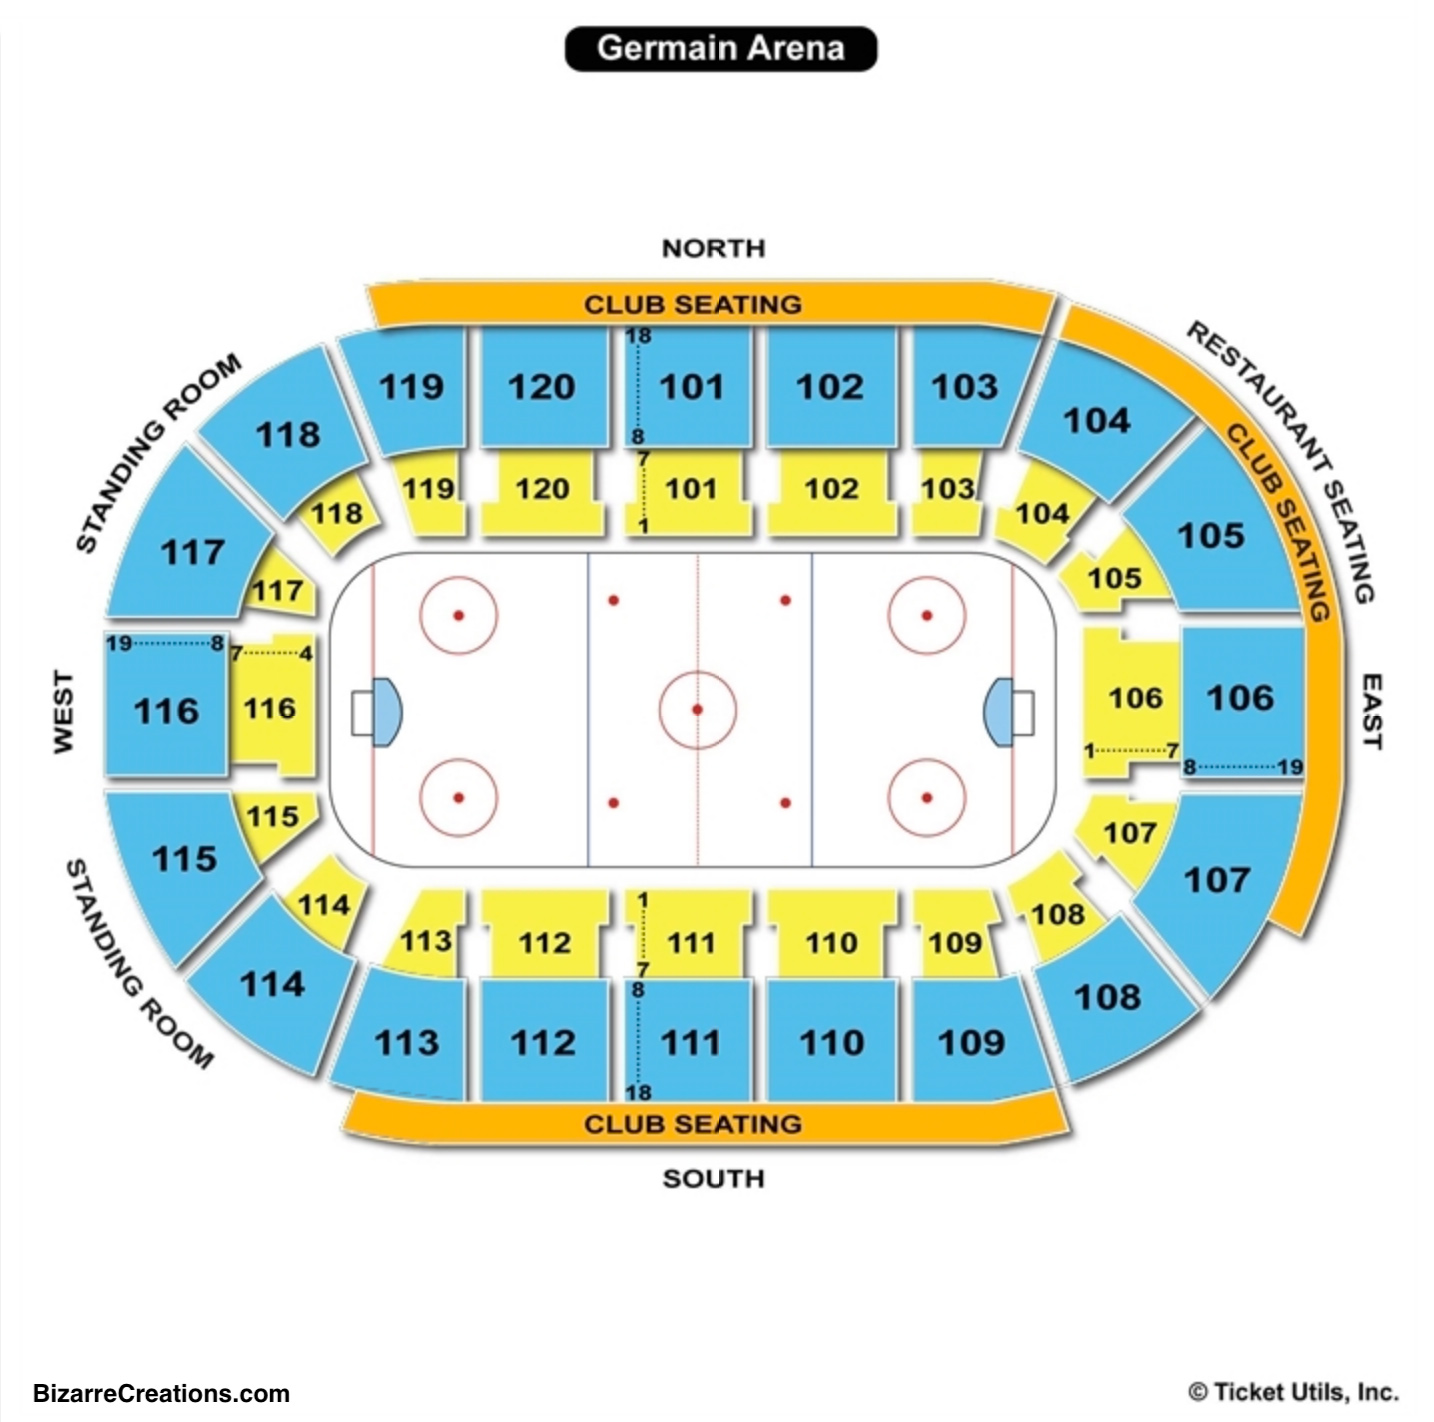 Germain Arena Seating Chart | Seating Charts & Tickets